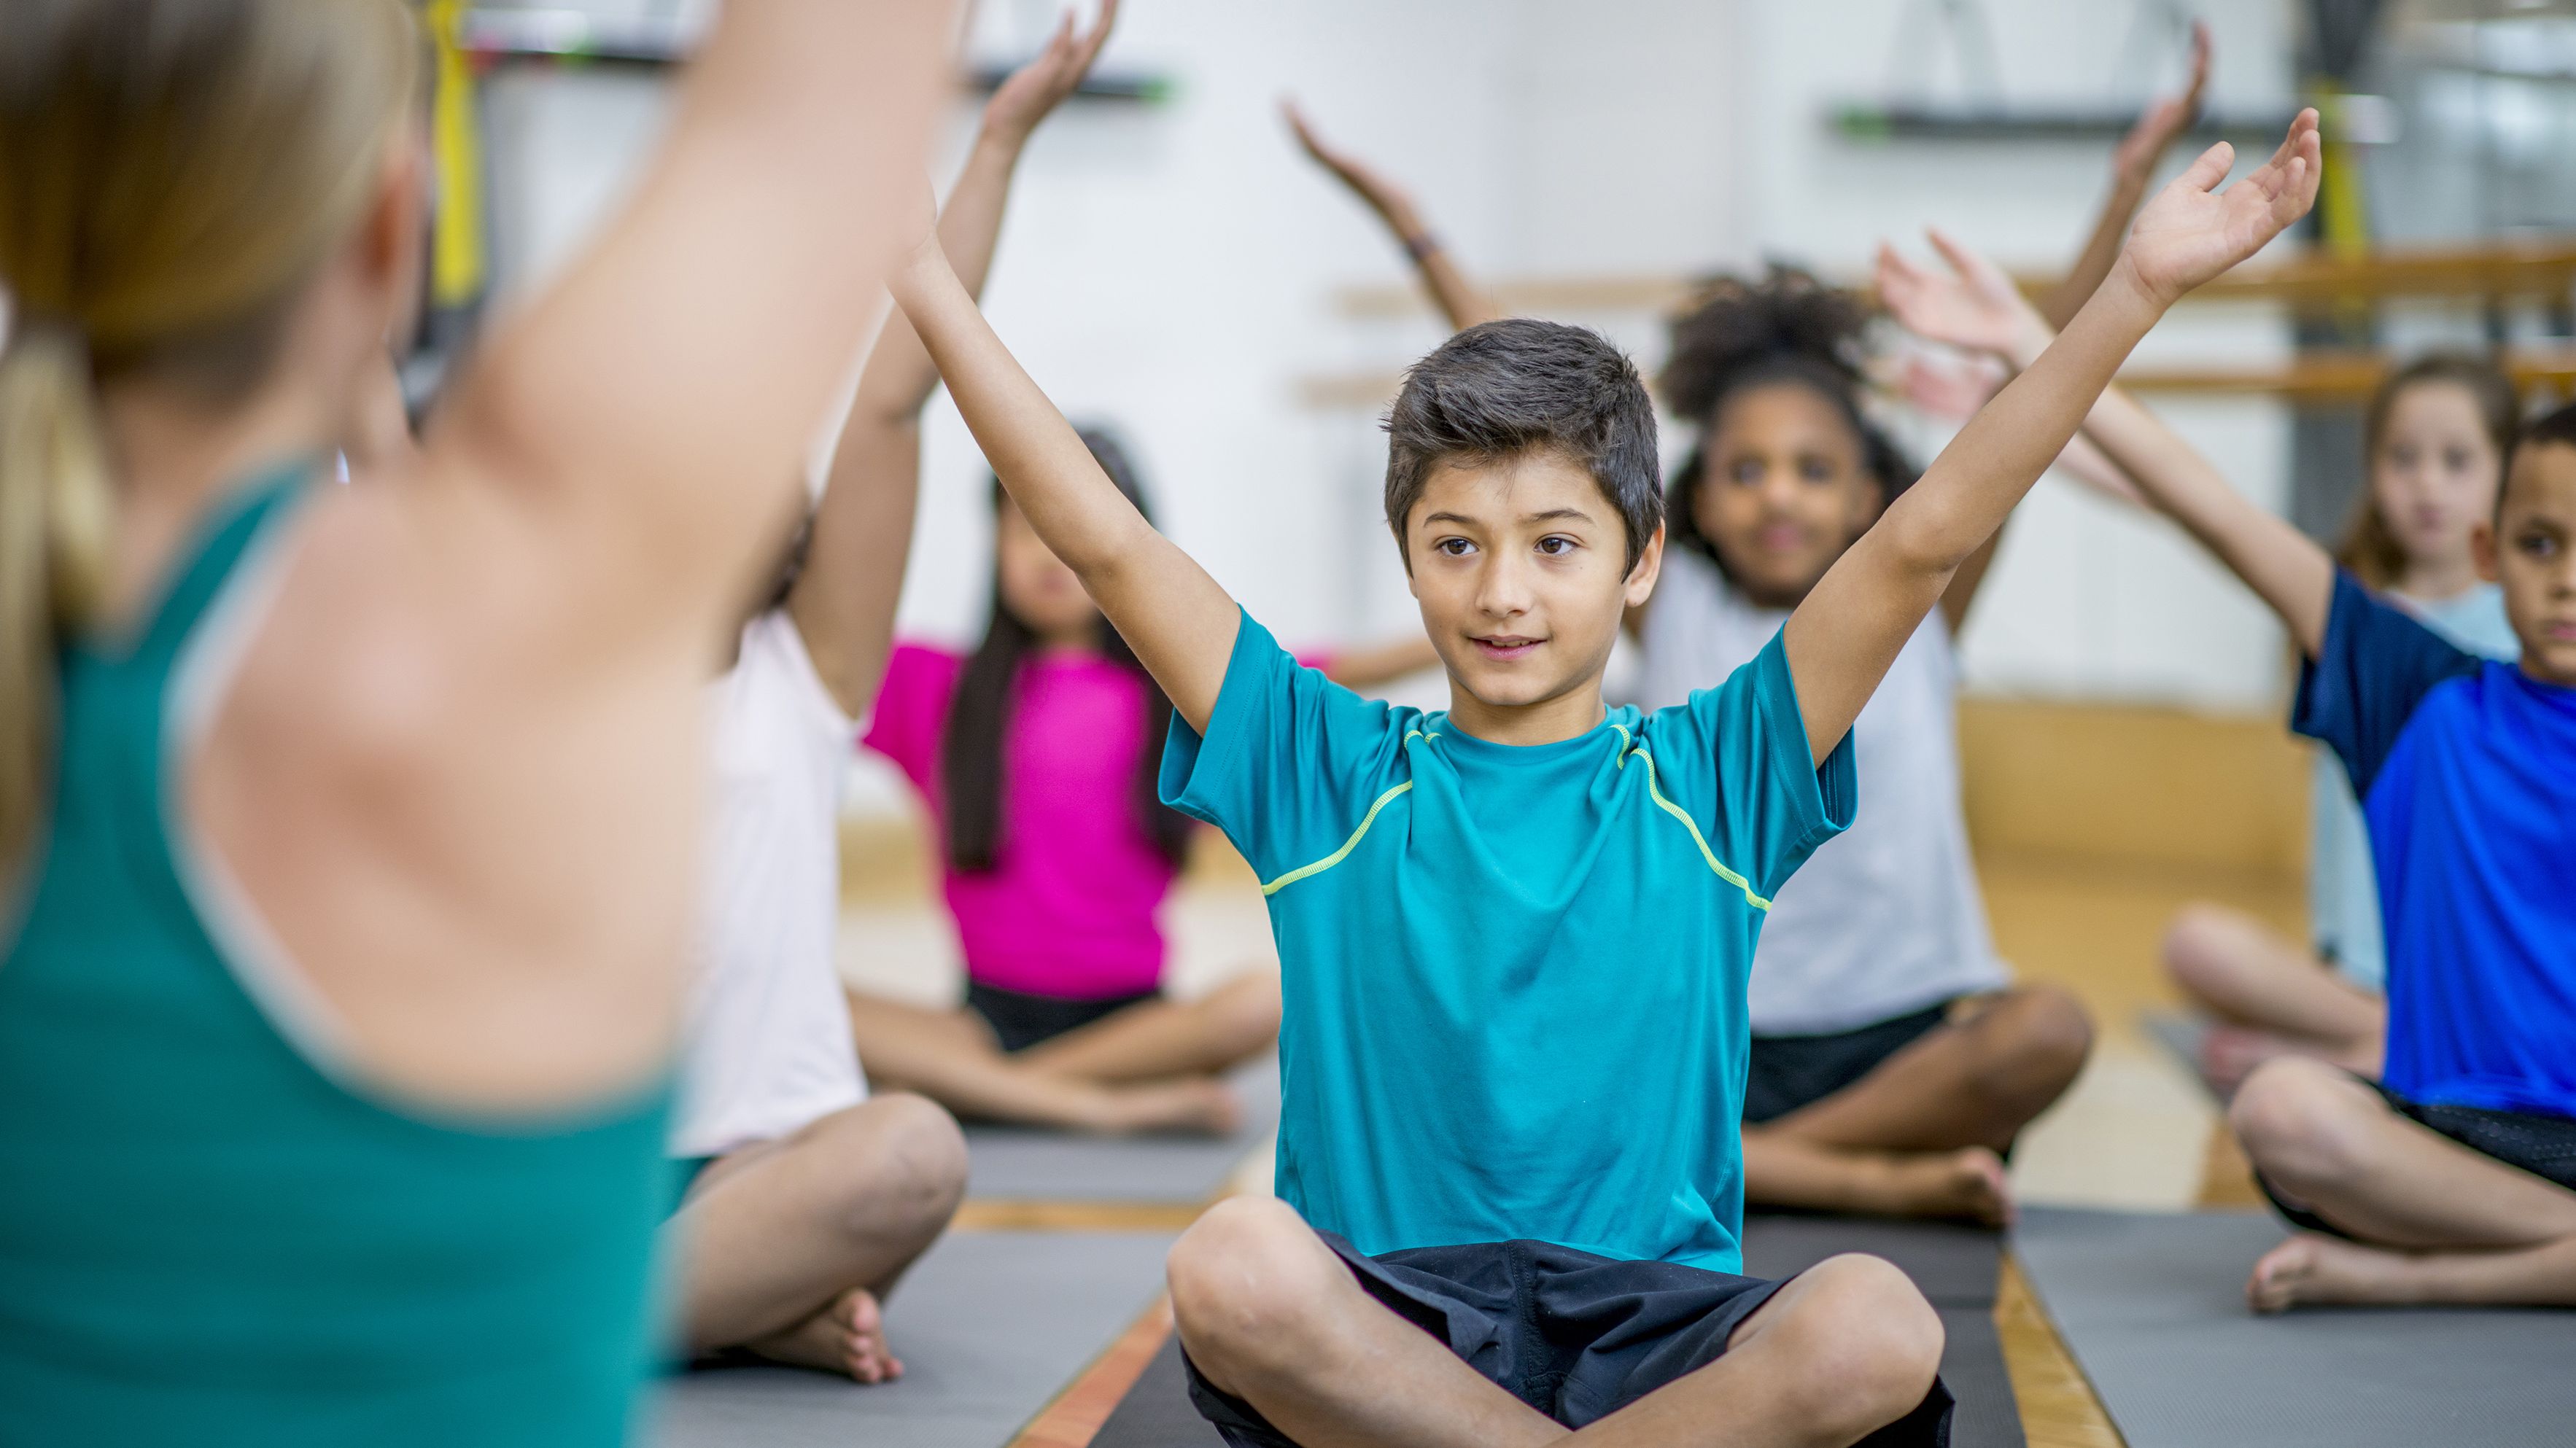 Pupils in a Yoga course at school